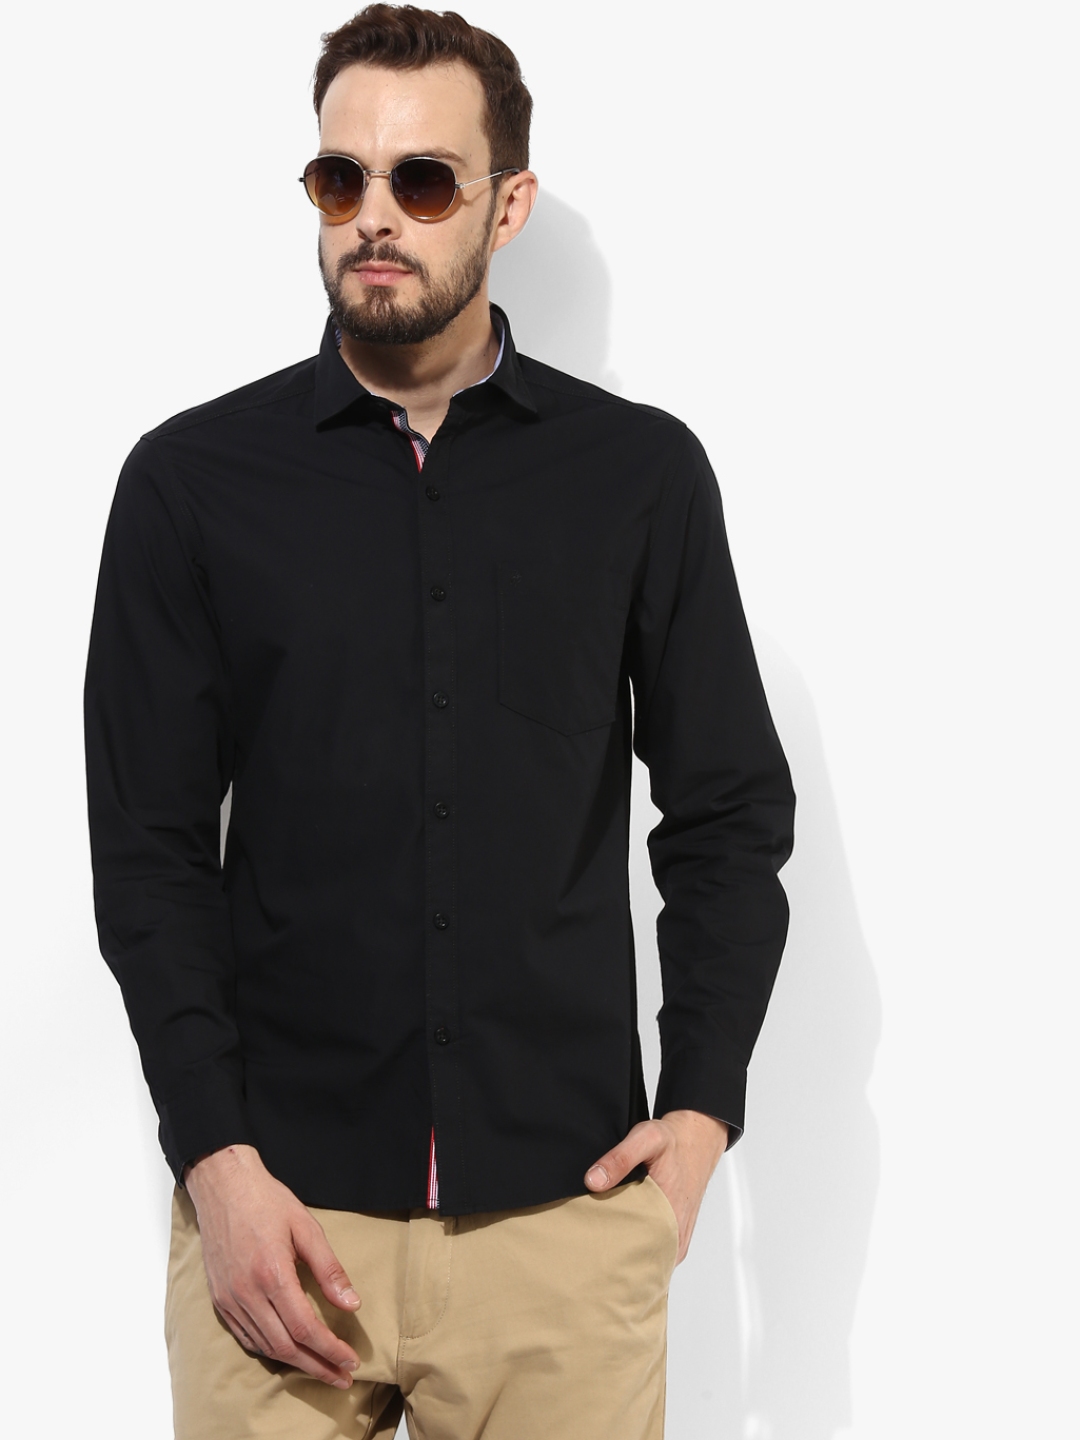 Buy Black Solid Slim Fit Casual Shirt - Shirts for Men 7682499 | Myntra